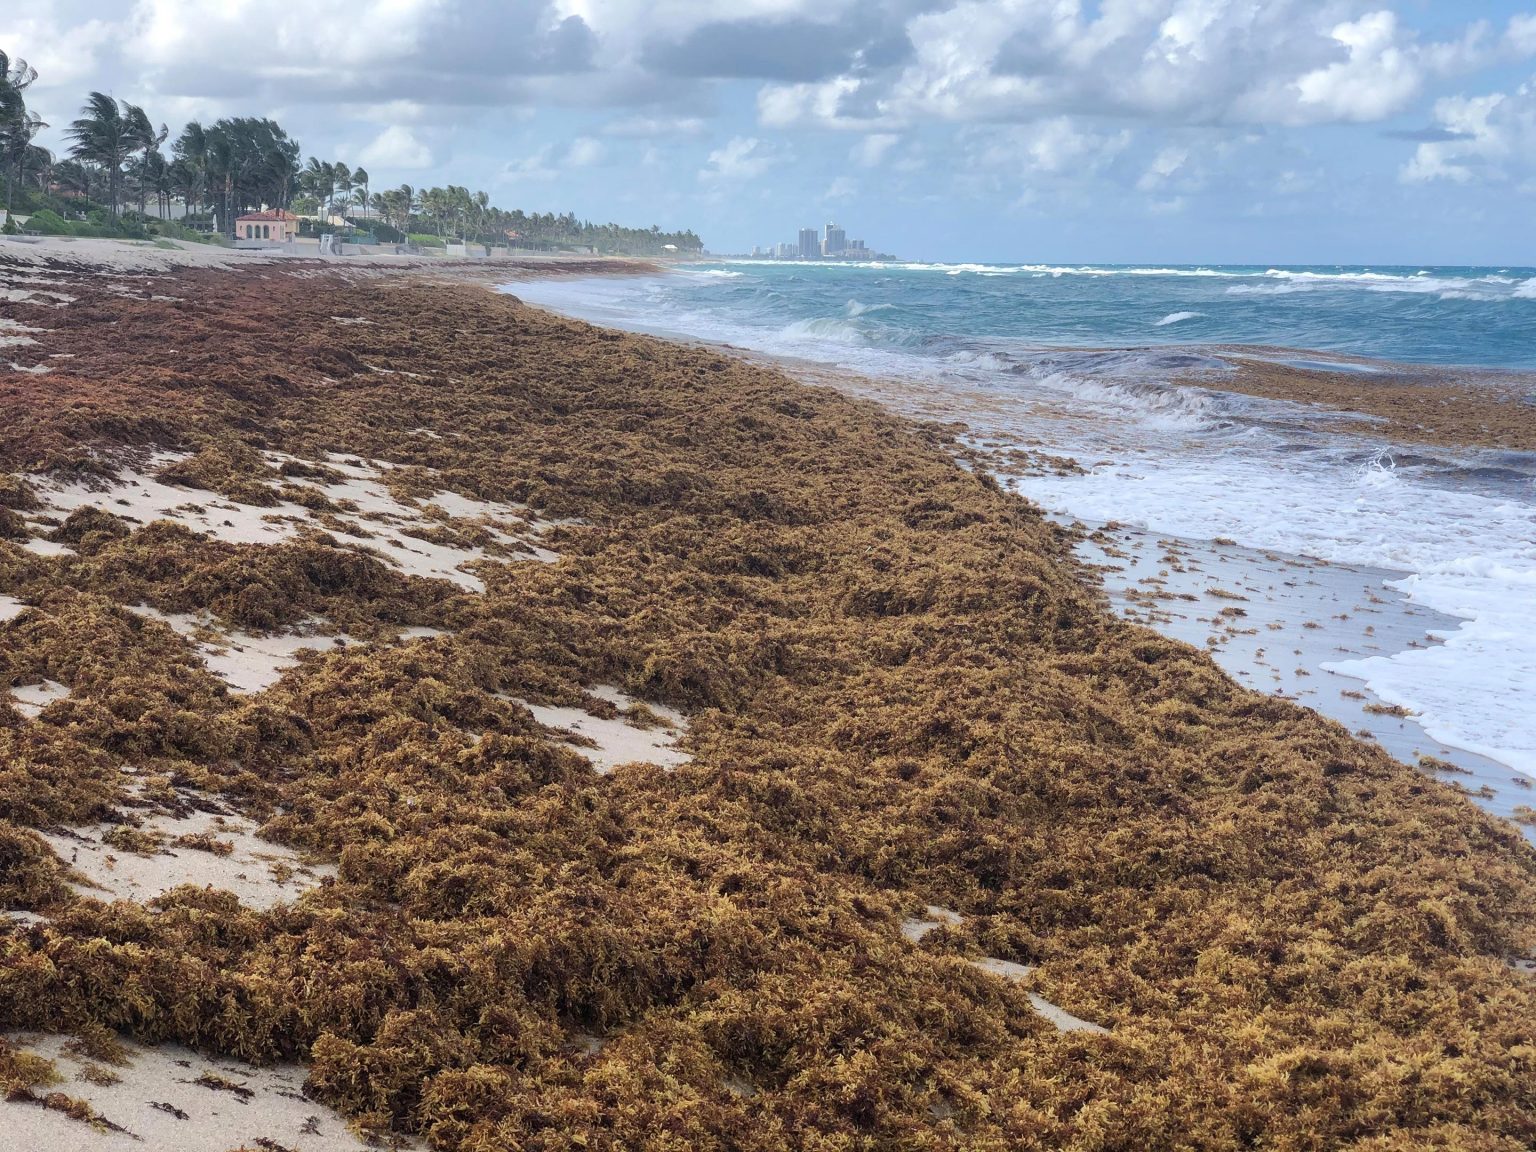 Toxic "Dead Zone" Surge in Nitrogen Has Turned Sargassum Into the